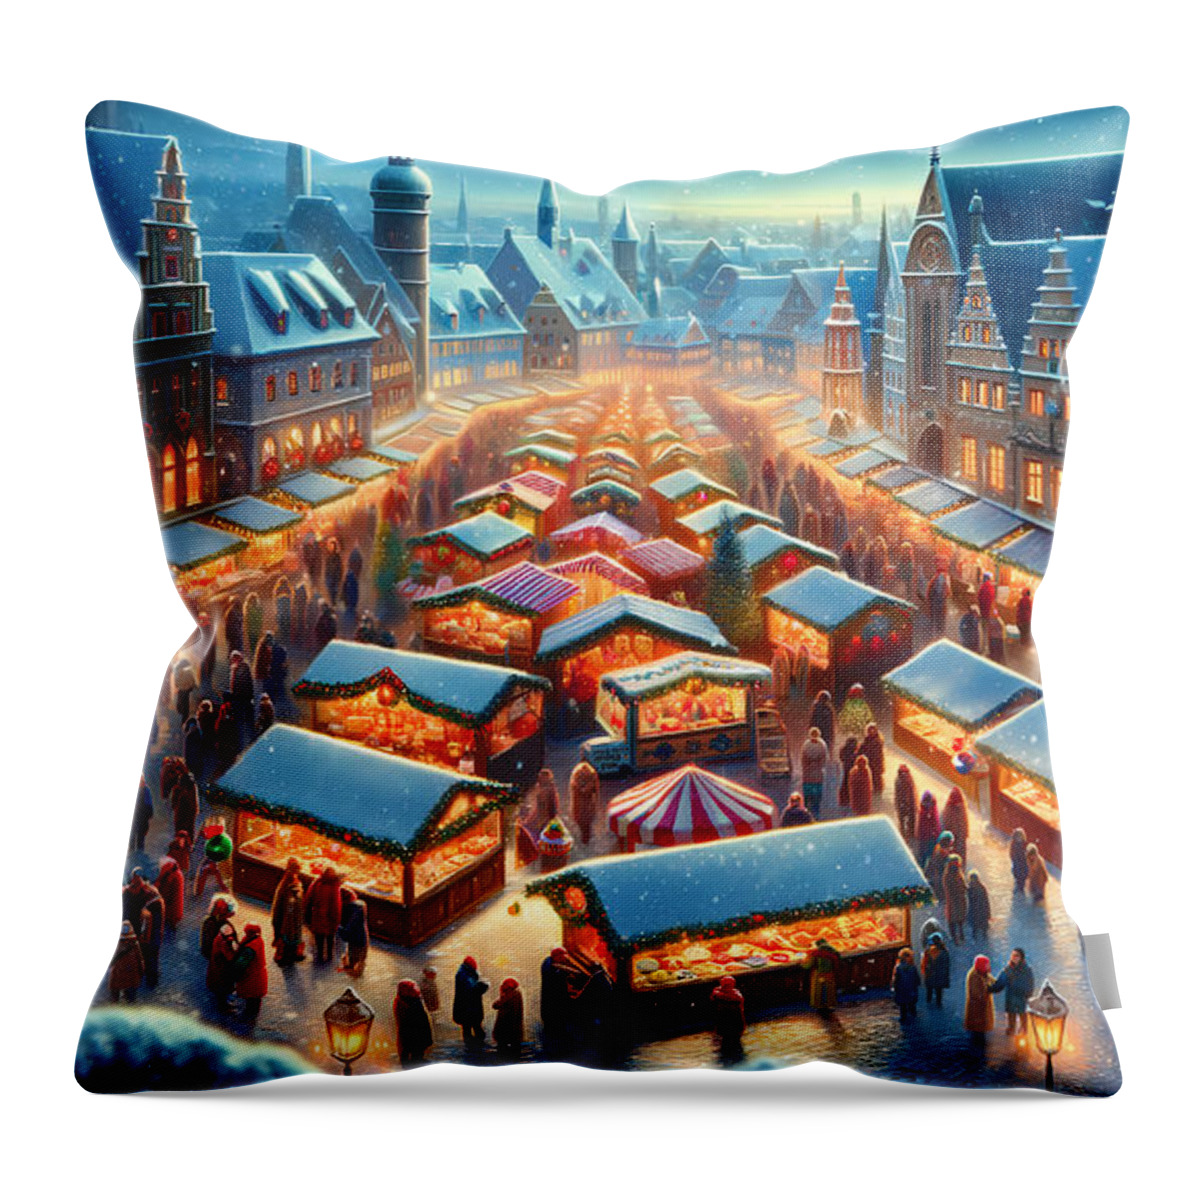 Christmas Throw Pillow featuring the digital art Festive Christmas Market, A bustling Christmas market in a snowy European town by Jeff Creation